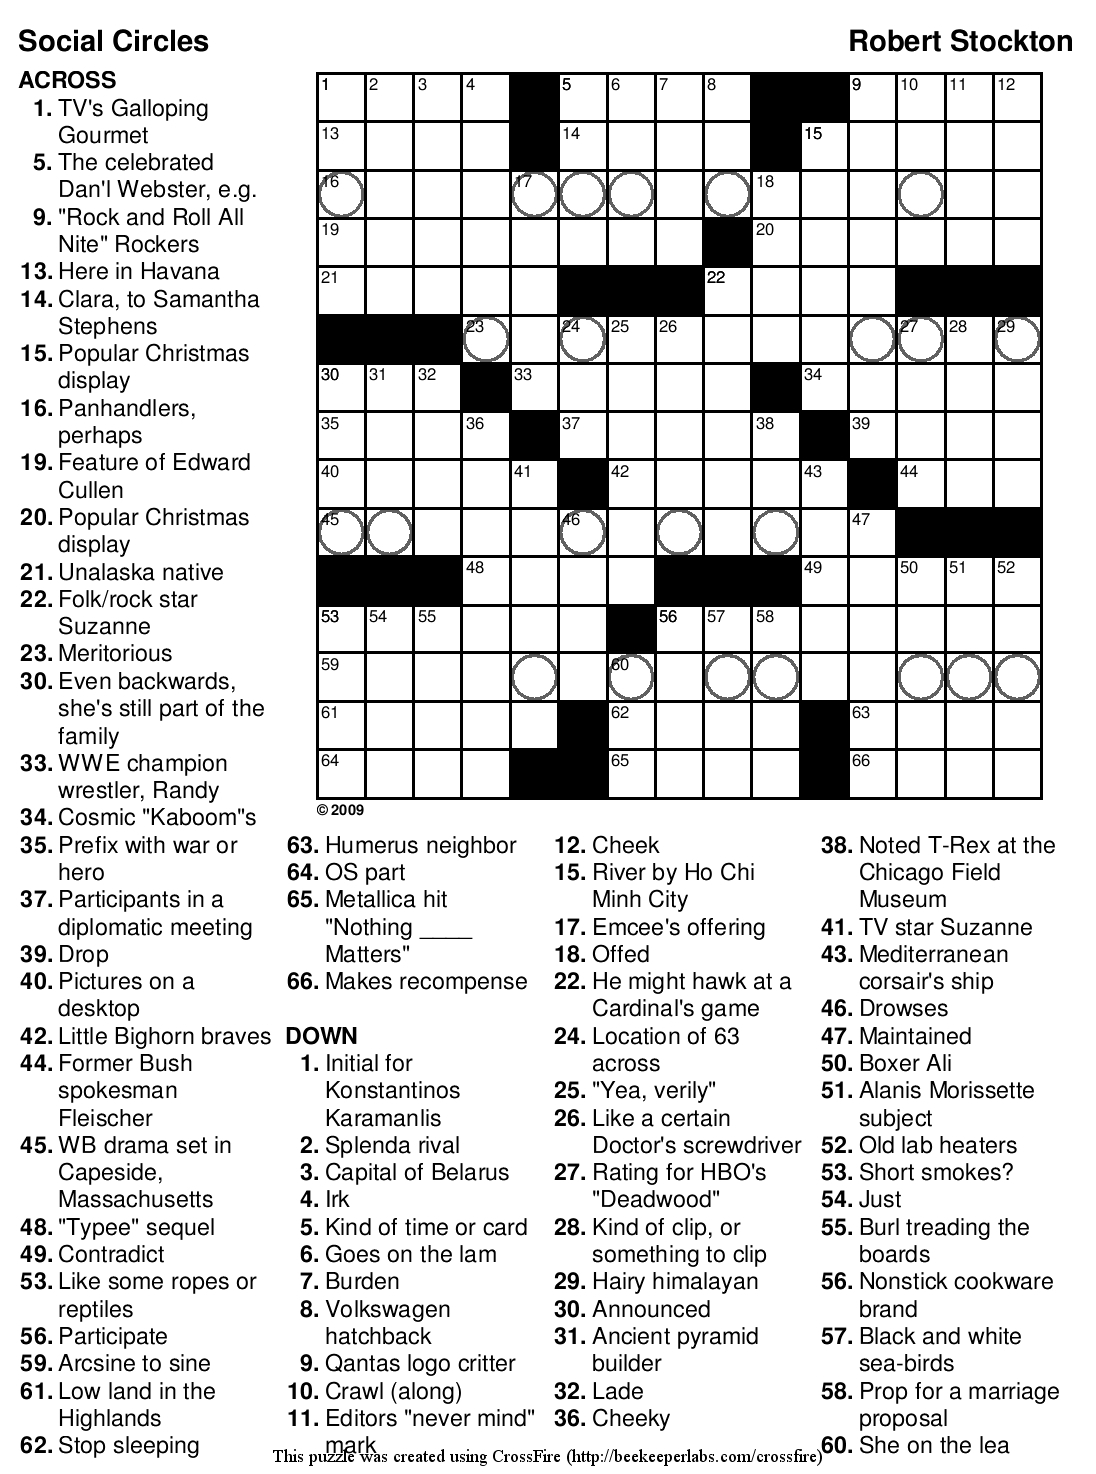 Crossword Puzzles Printable - Yahoo Image Search Results | Crossword - Printable Daily Puzzles